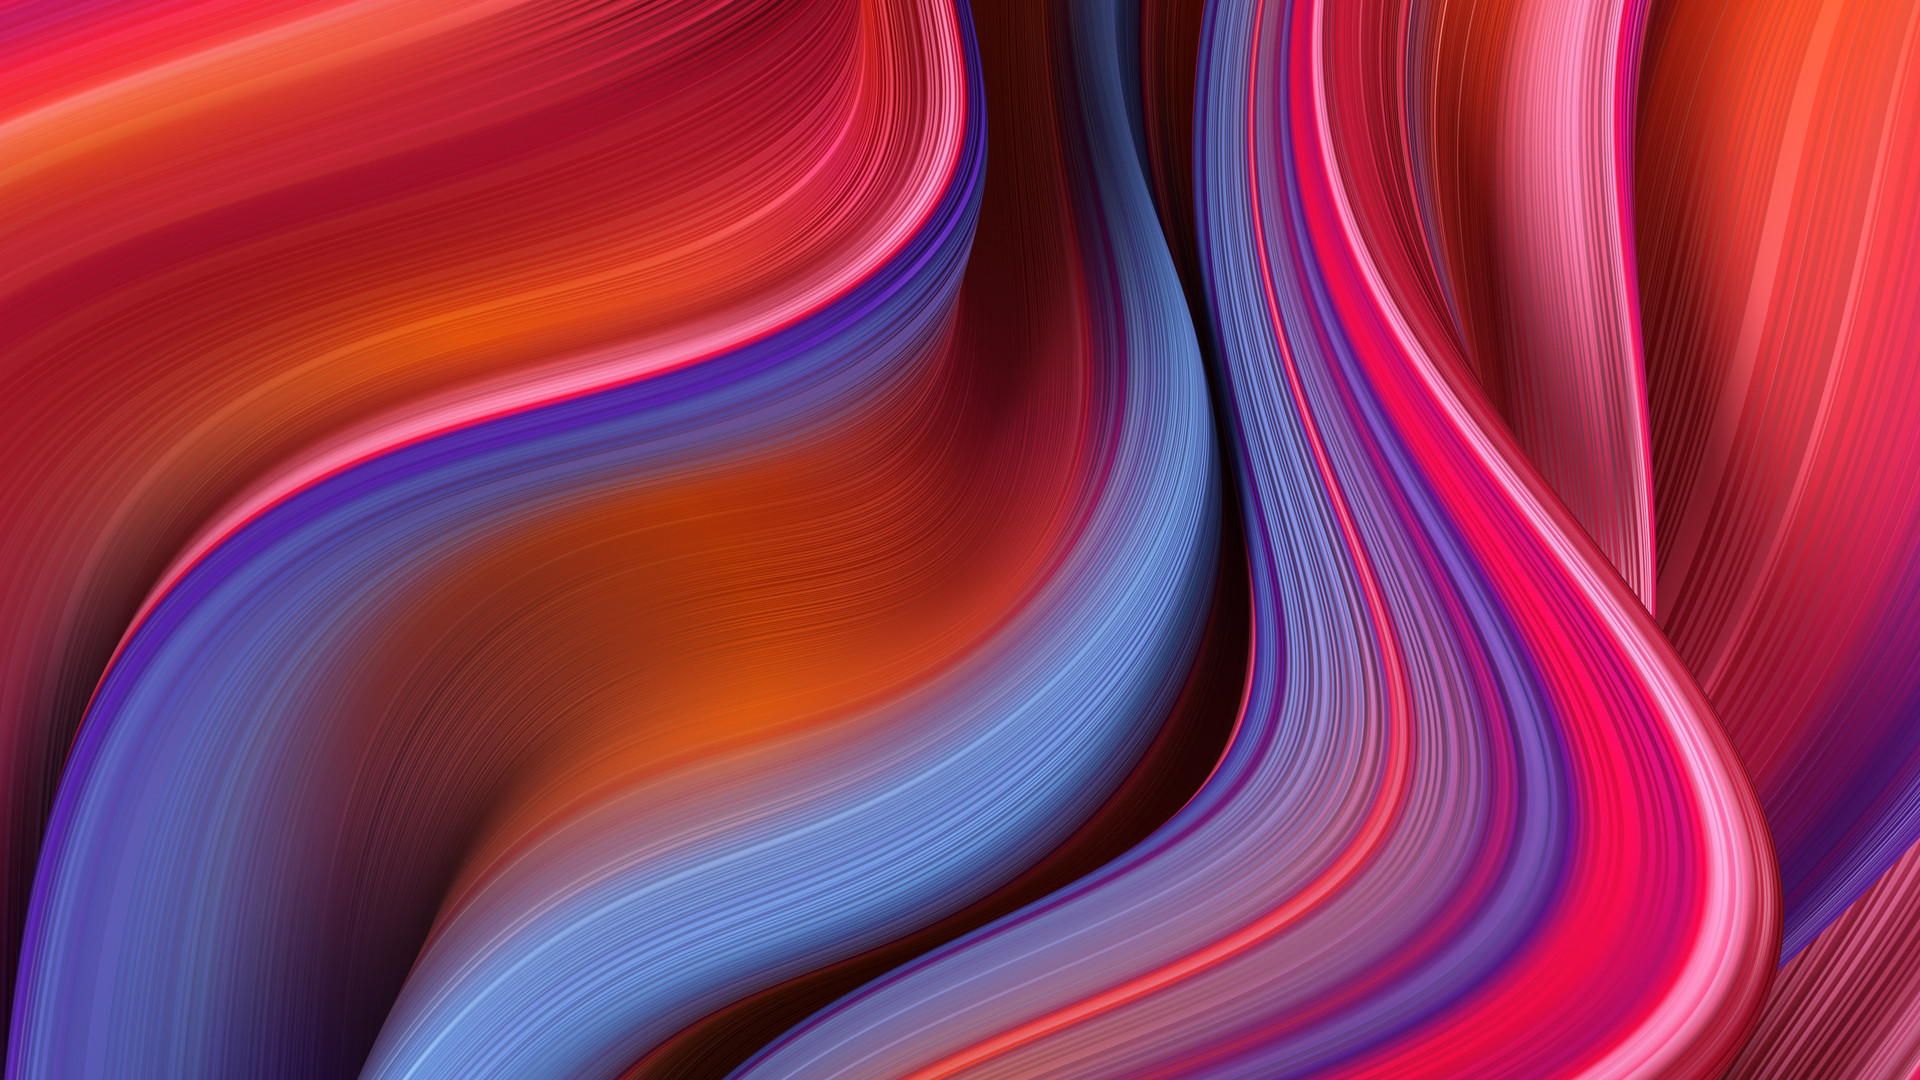 1920x1080 4k Abstract Art Laptop Full HD 1080P ,HD 4k Wallpapers,Images